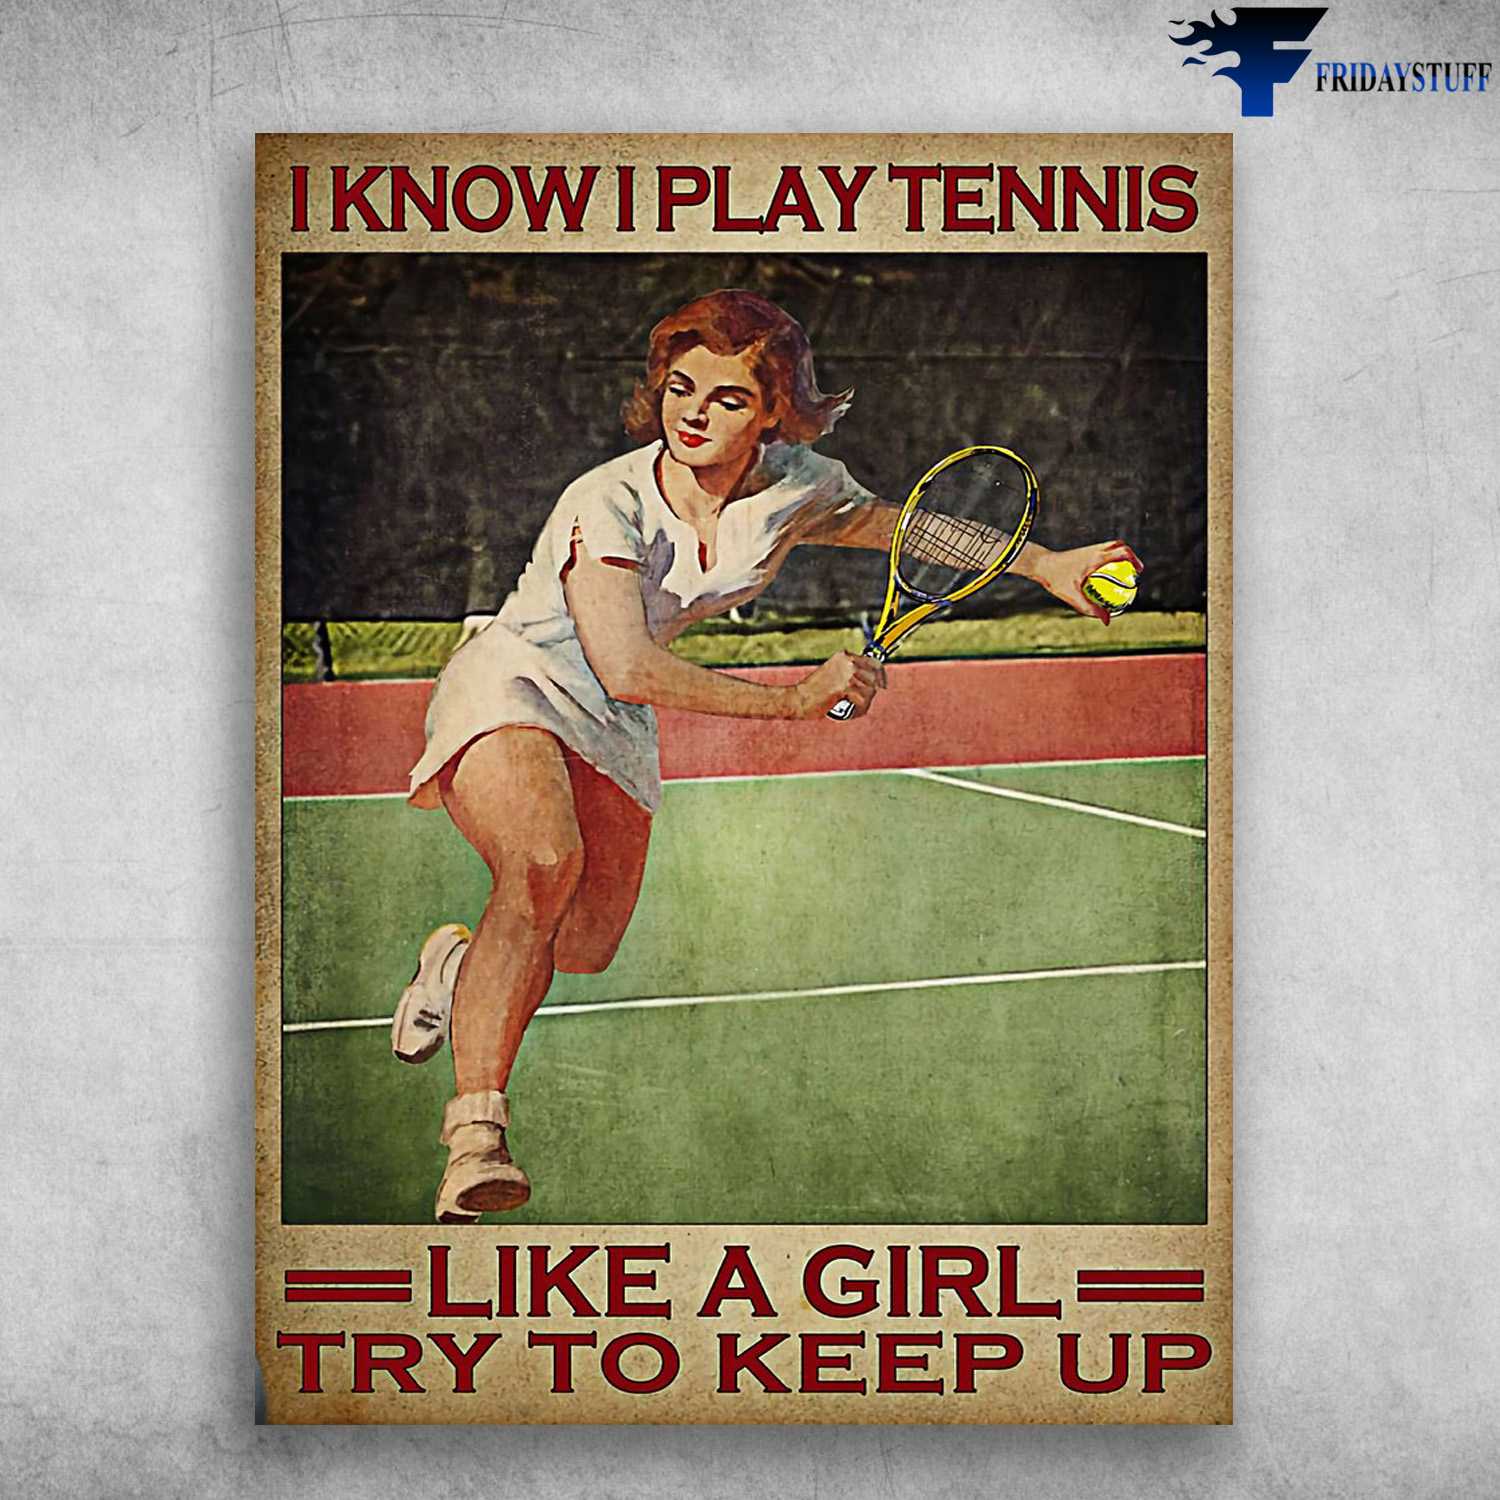 Tennis Player, Girl Loves Tennis - I Know, I Play Tennis, Like A Girl, Try To Keep Up